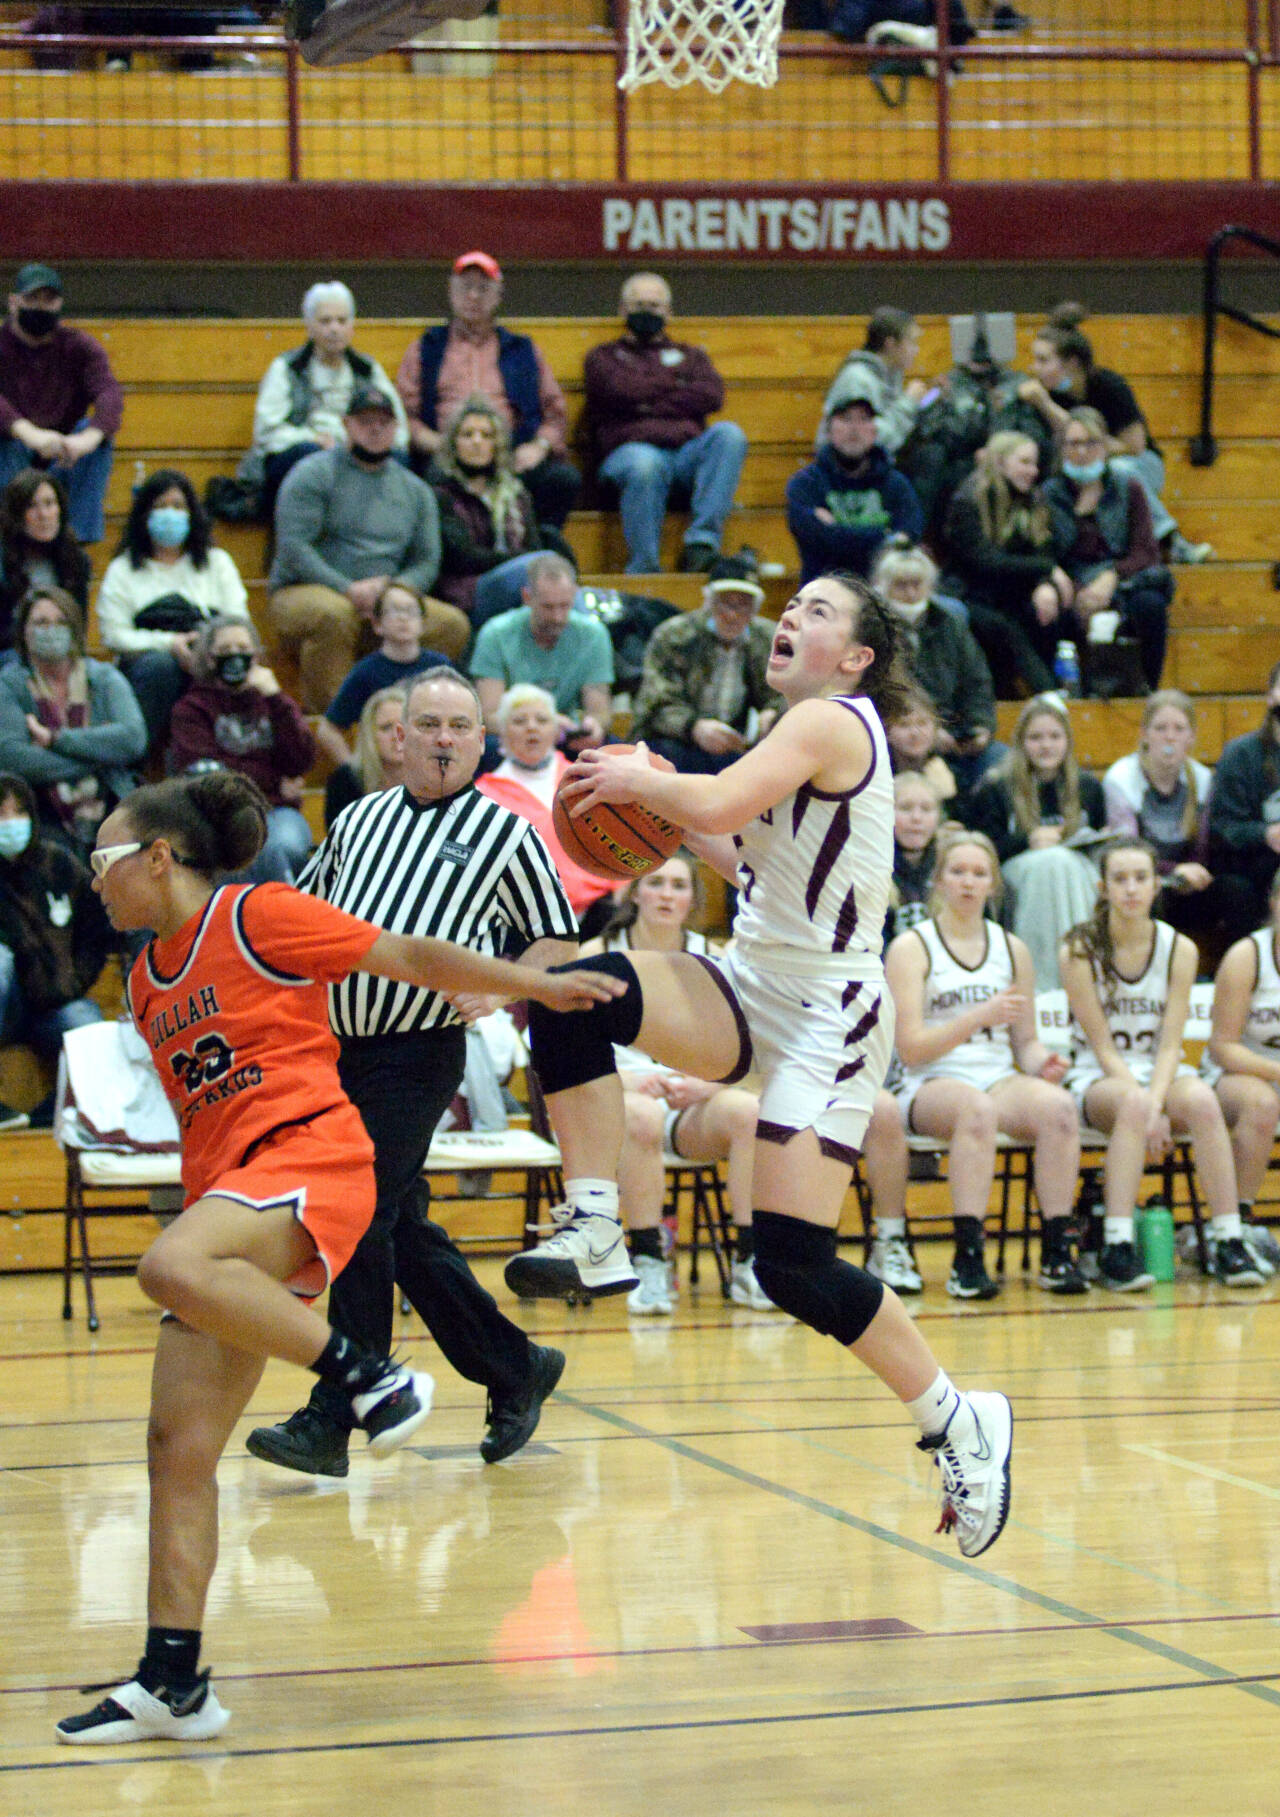 RYAN SPARKS | THE DAILY WORLD Montesano guard Jaiden King, right, is fouled by Zillah’s Talani Oliver while driving to the basket during Montesano’s 59-52 win over Zillah in a 1A Regional game on Saturday at WF West High School in Chehalis.